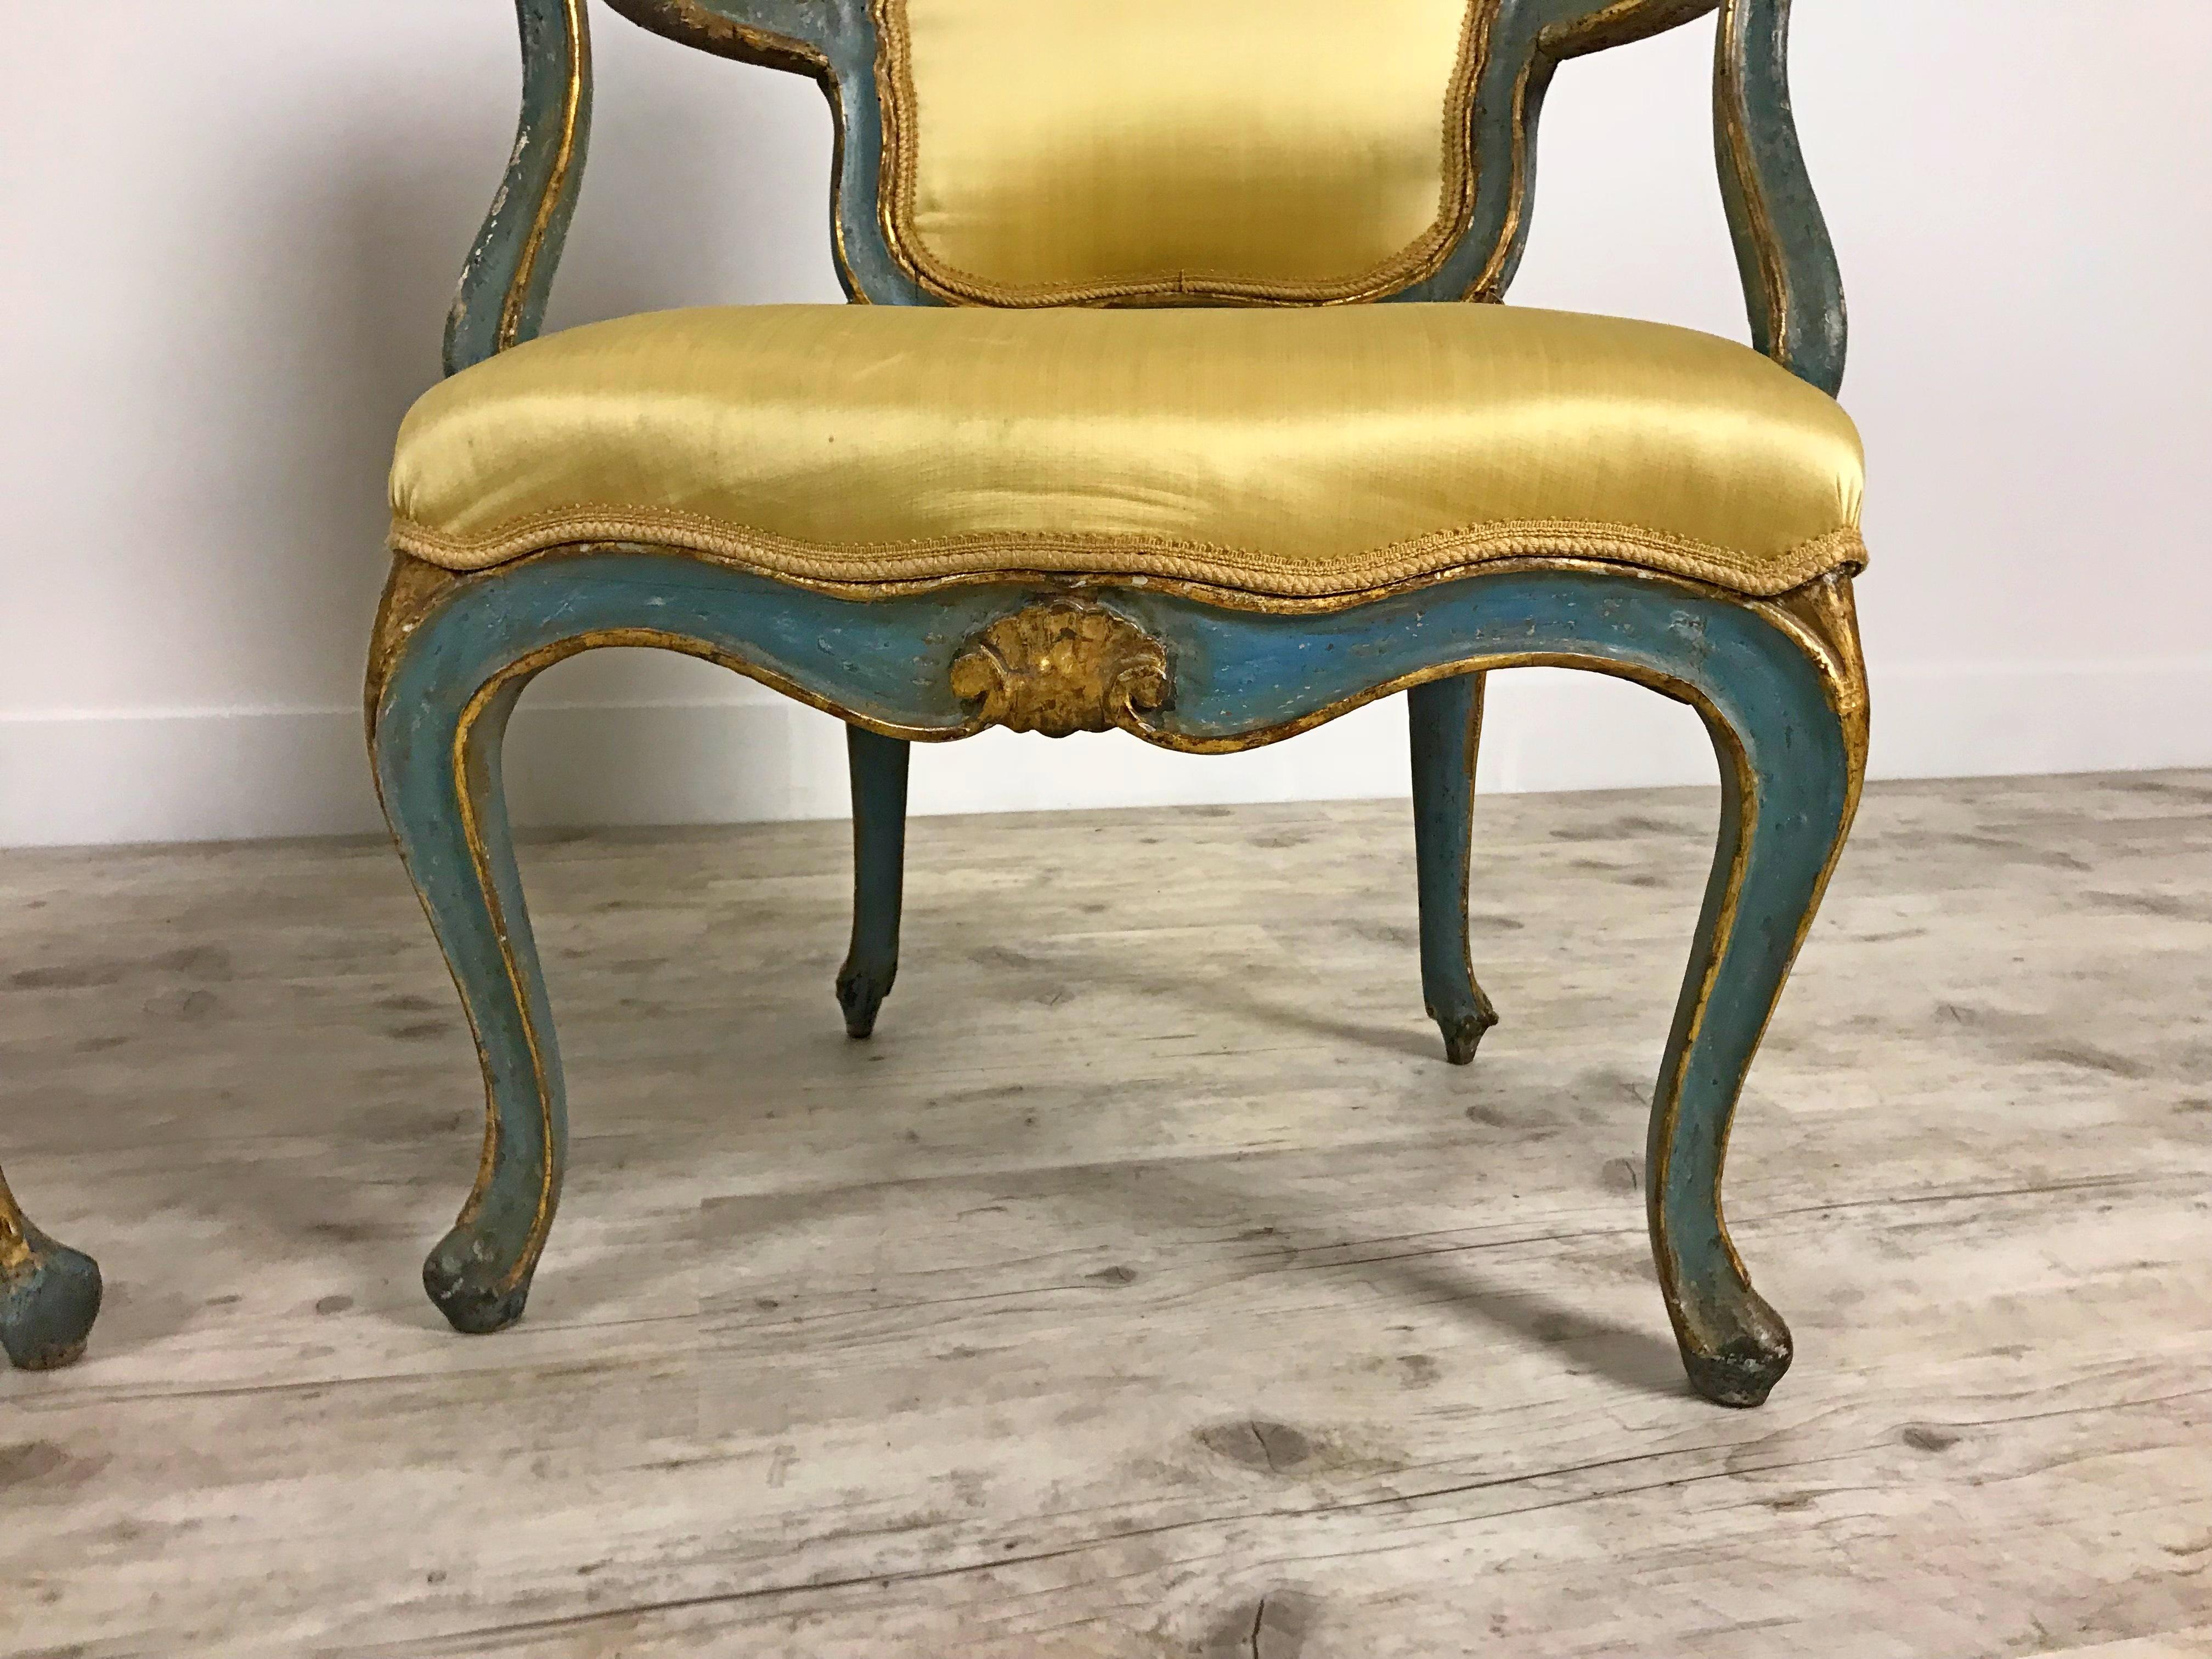 Italian 18th Century Gilded and Lacquered Venetian Louis XV Period Pair of Armchairs